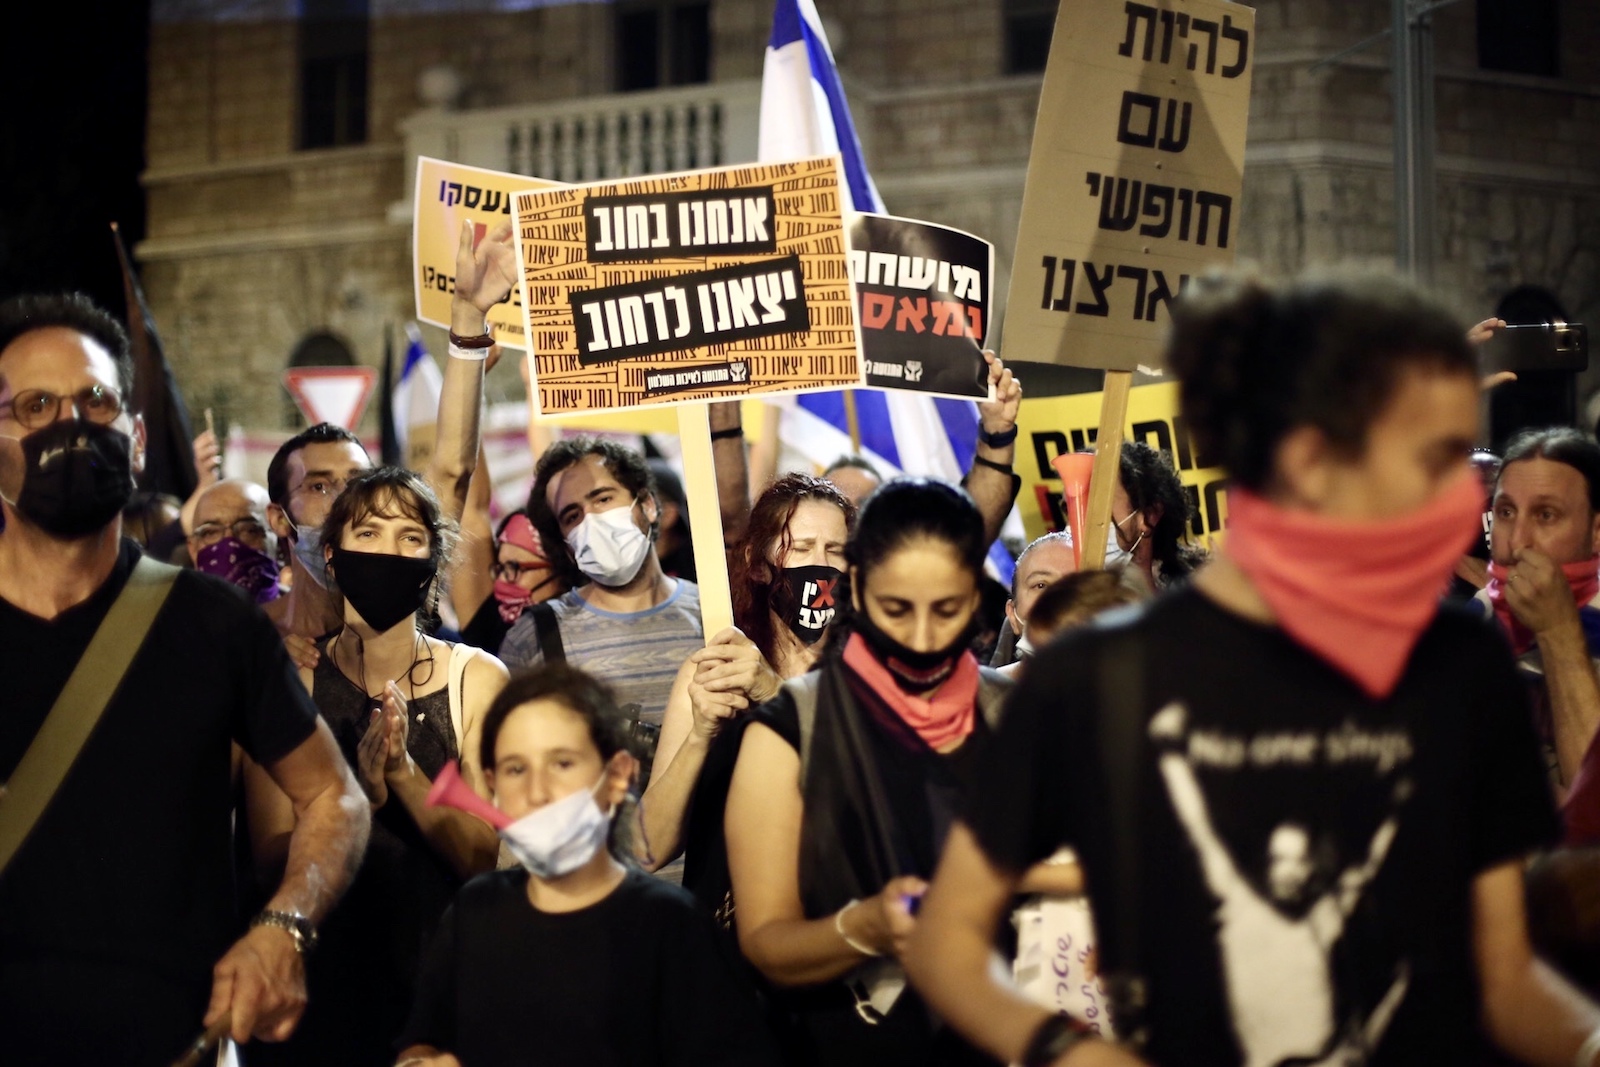 Israelis are great at protesting and their protests lead to zilch